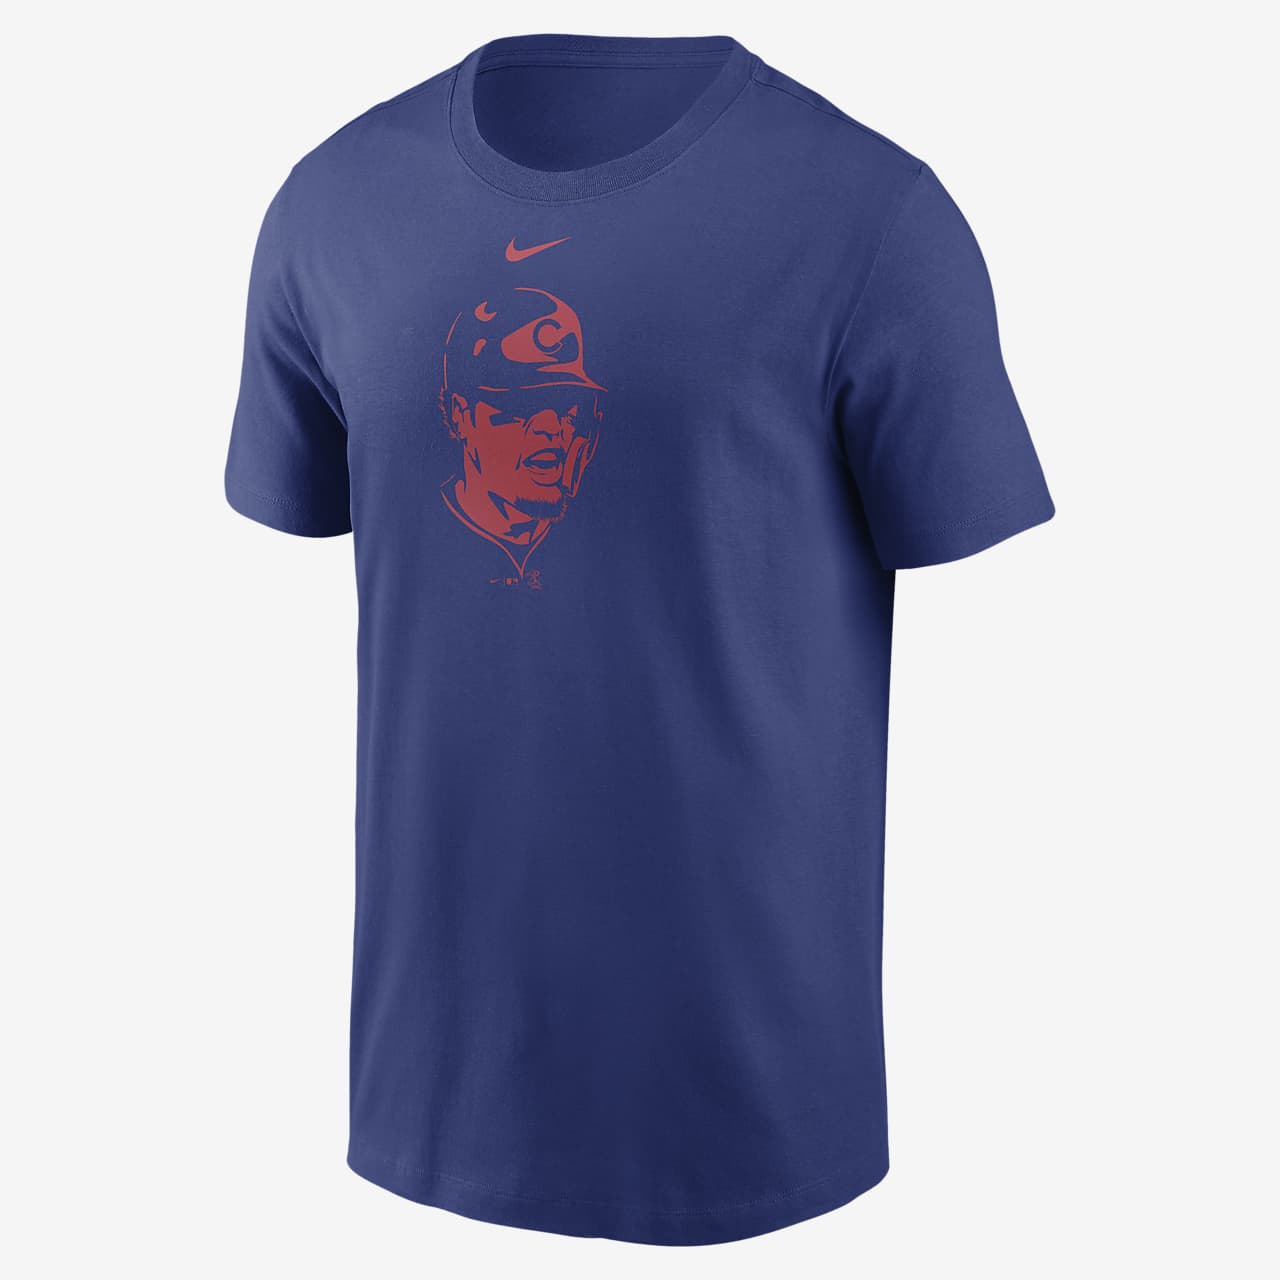 chicago cubs t shirts mens